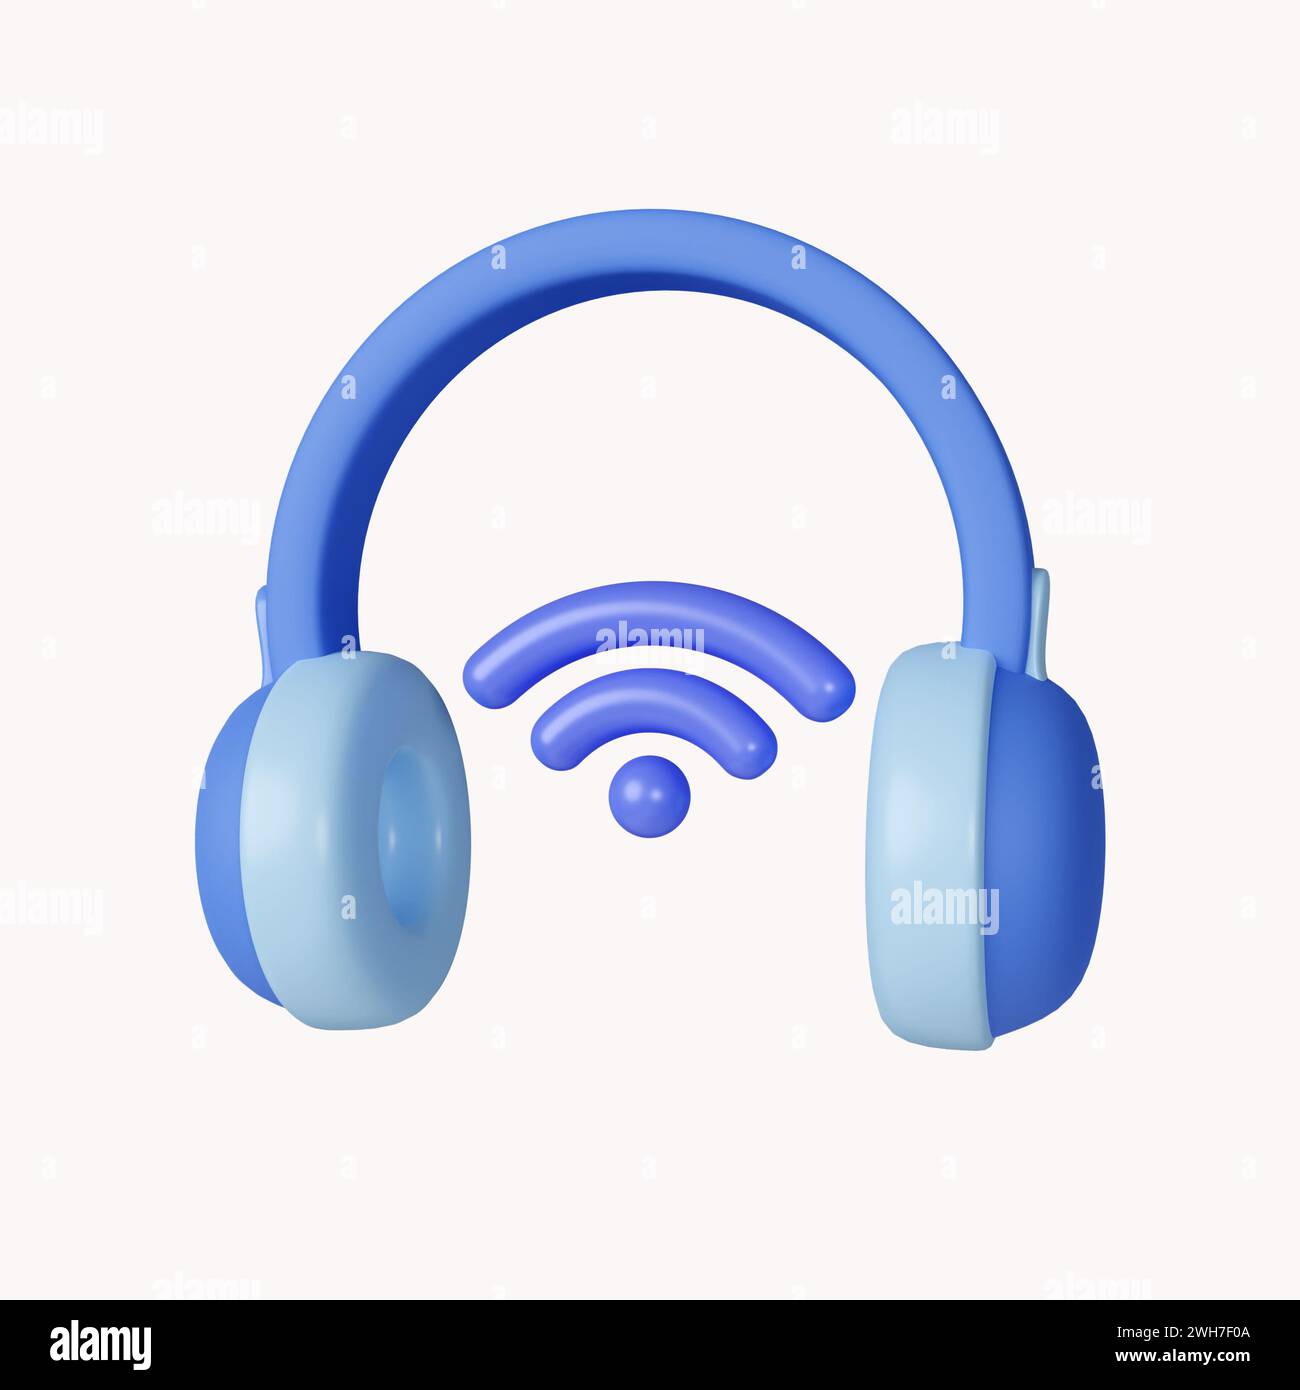 3d Smart headphones system. Internet of things concept with wireless connection. icon isolated on white background. 3d rendering illustration Stock Photo